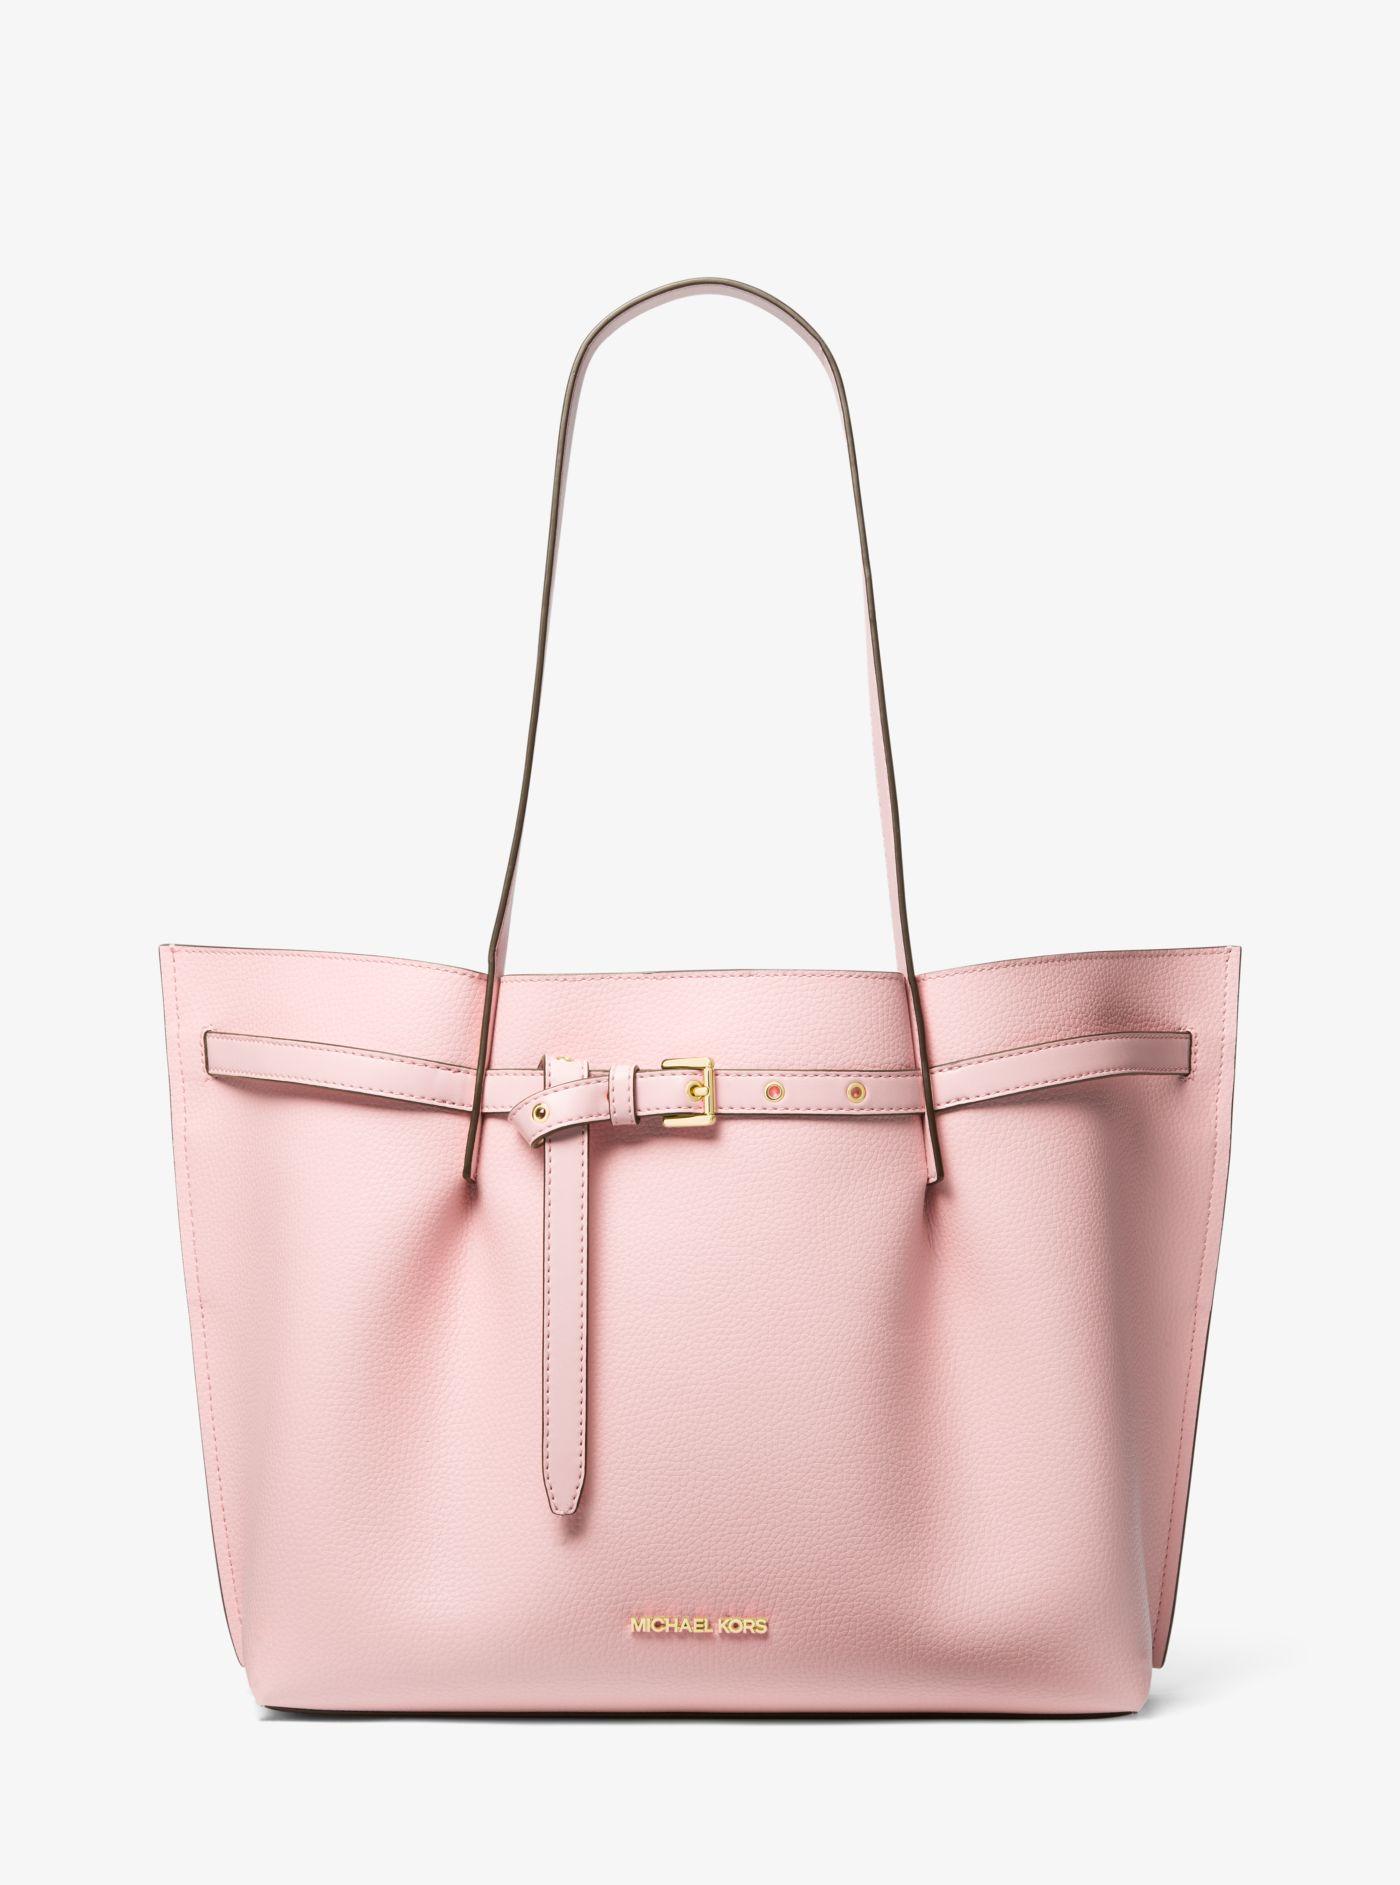 Michael Kors Emilia Large Pebbled Leather Tote Bag in Pink | Lyst